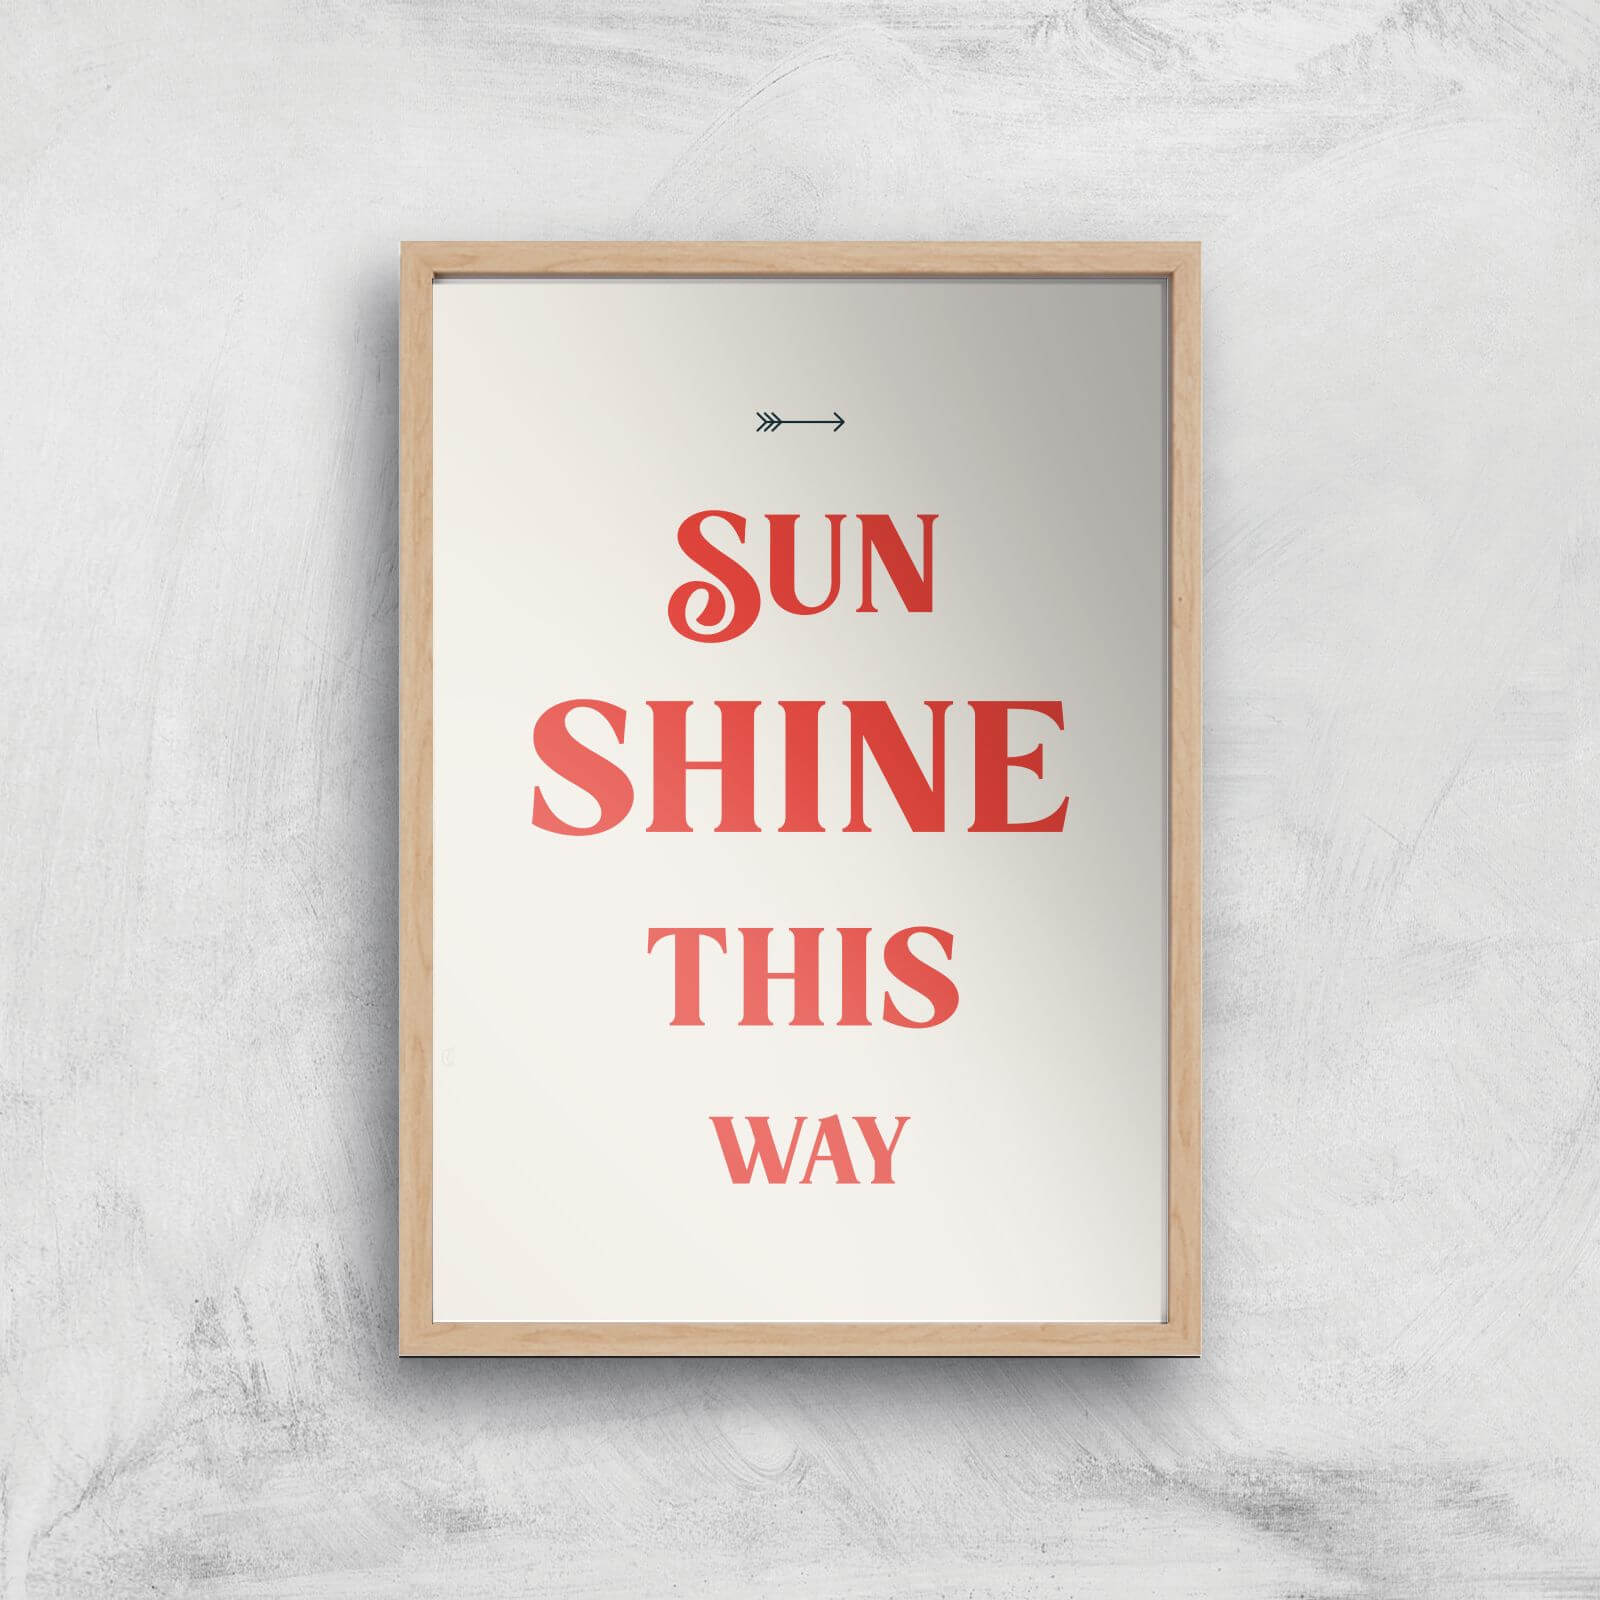 Hermione Chantal Sunshine This Way Giclee Art Print - A2 - Wooden Frame